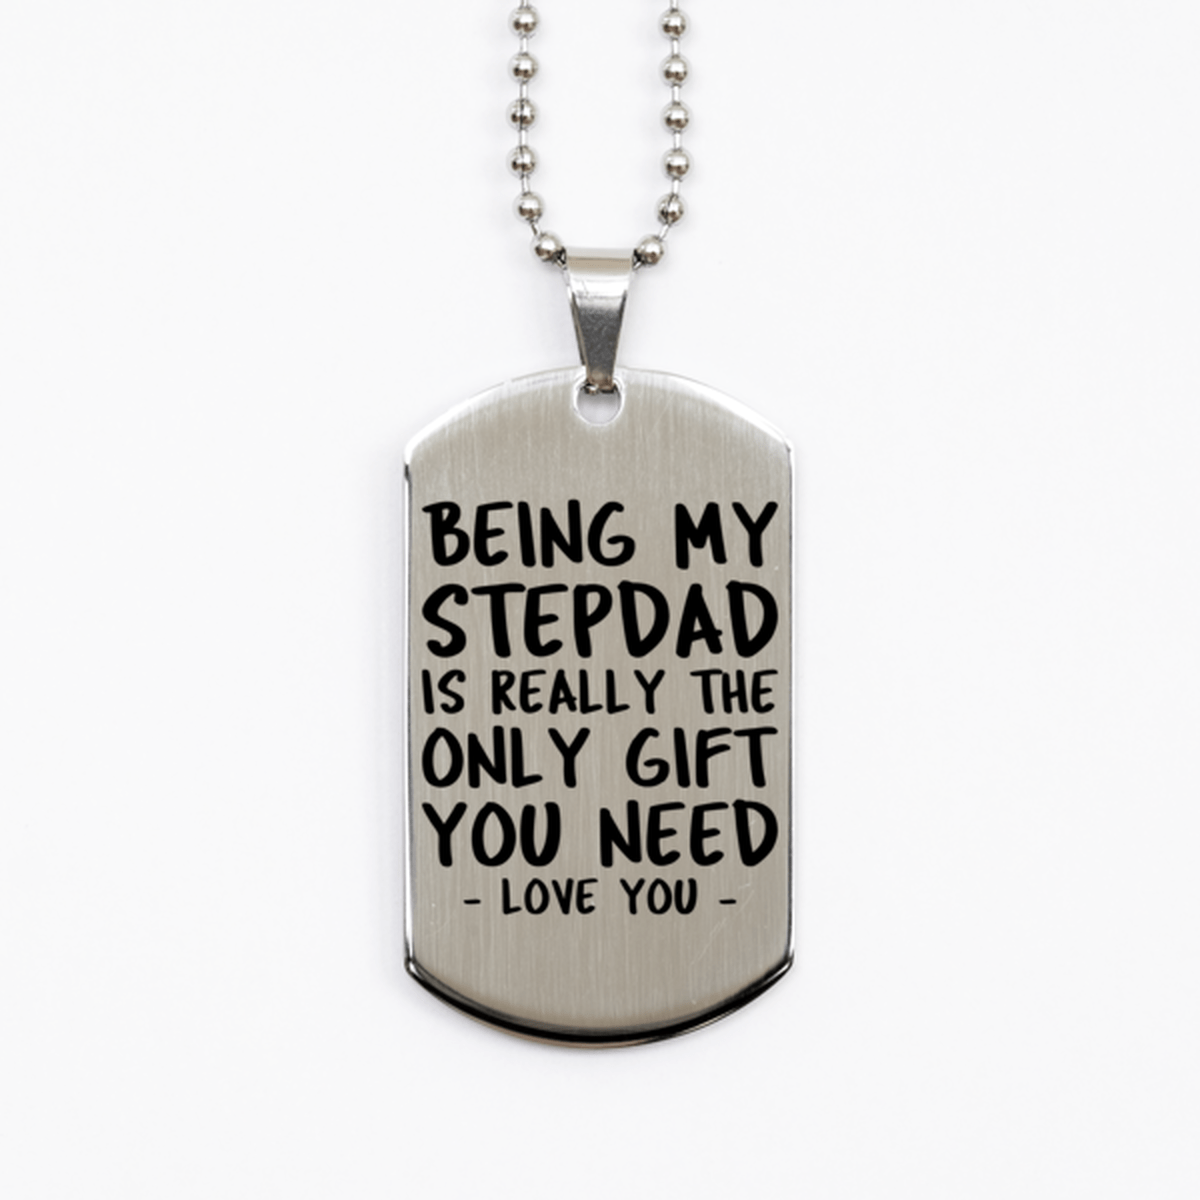 Funny Stepdad Silver Dog Tag Necklace, Being My Stepdad Is Really the Only Gift You Need, Best Birthday Gifts for Stepdad